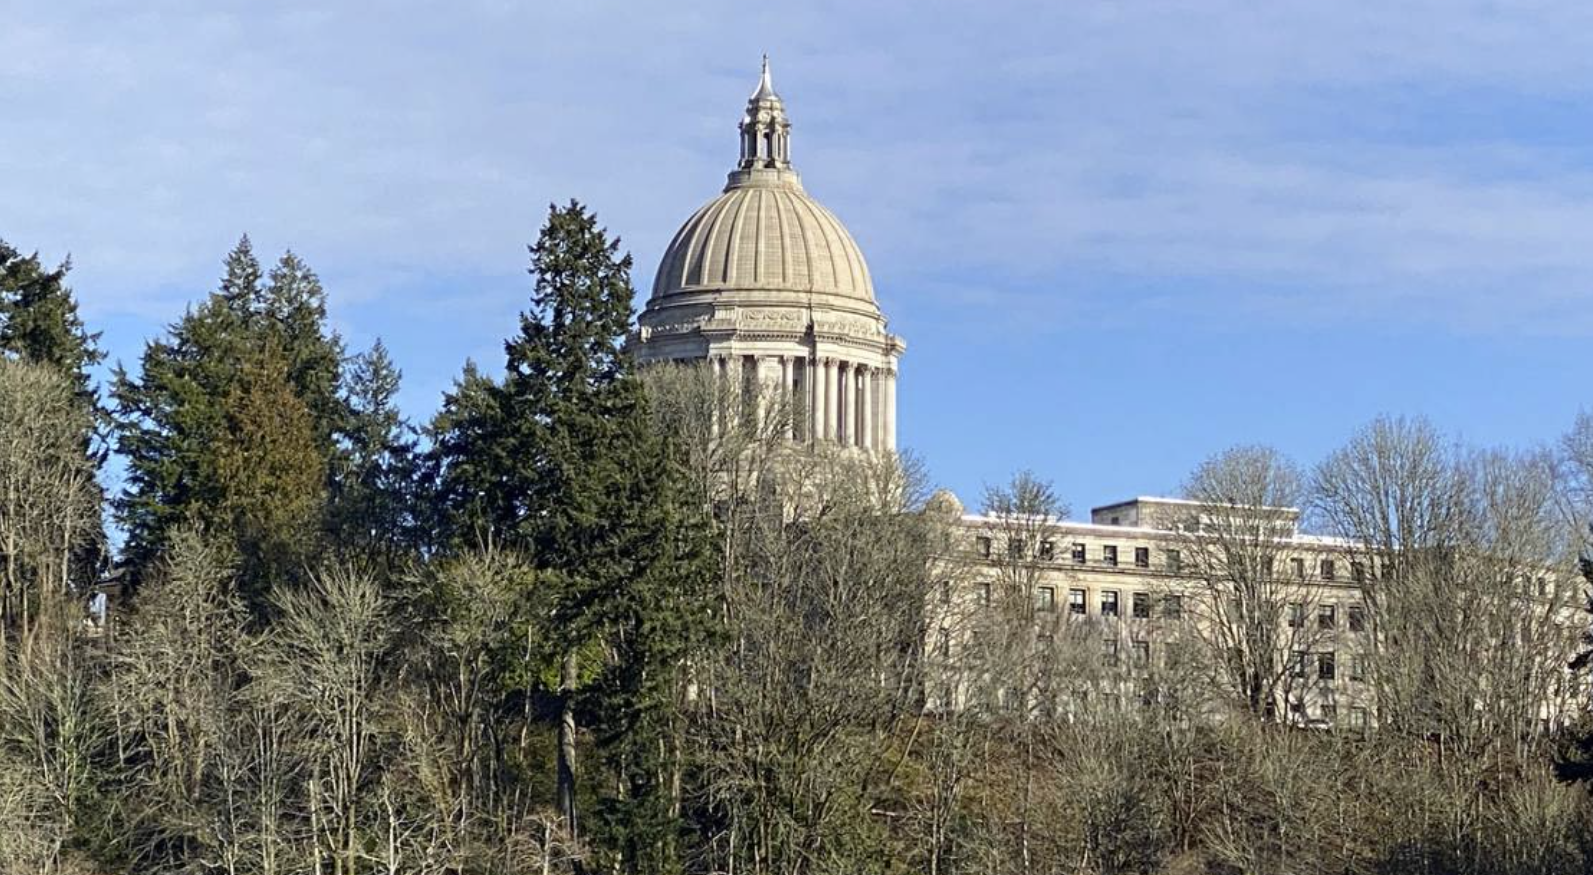 The dome of the Washington state Legislative Building in Olympia peeks above the trees and foliage lining the middle basin of Capitol Lake.